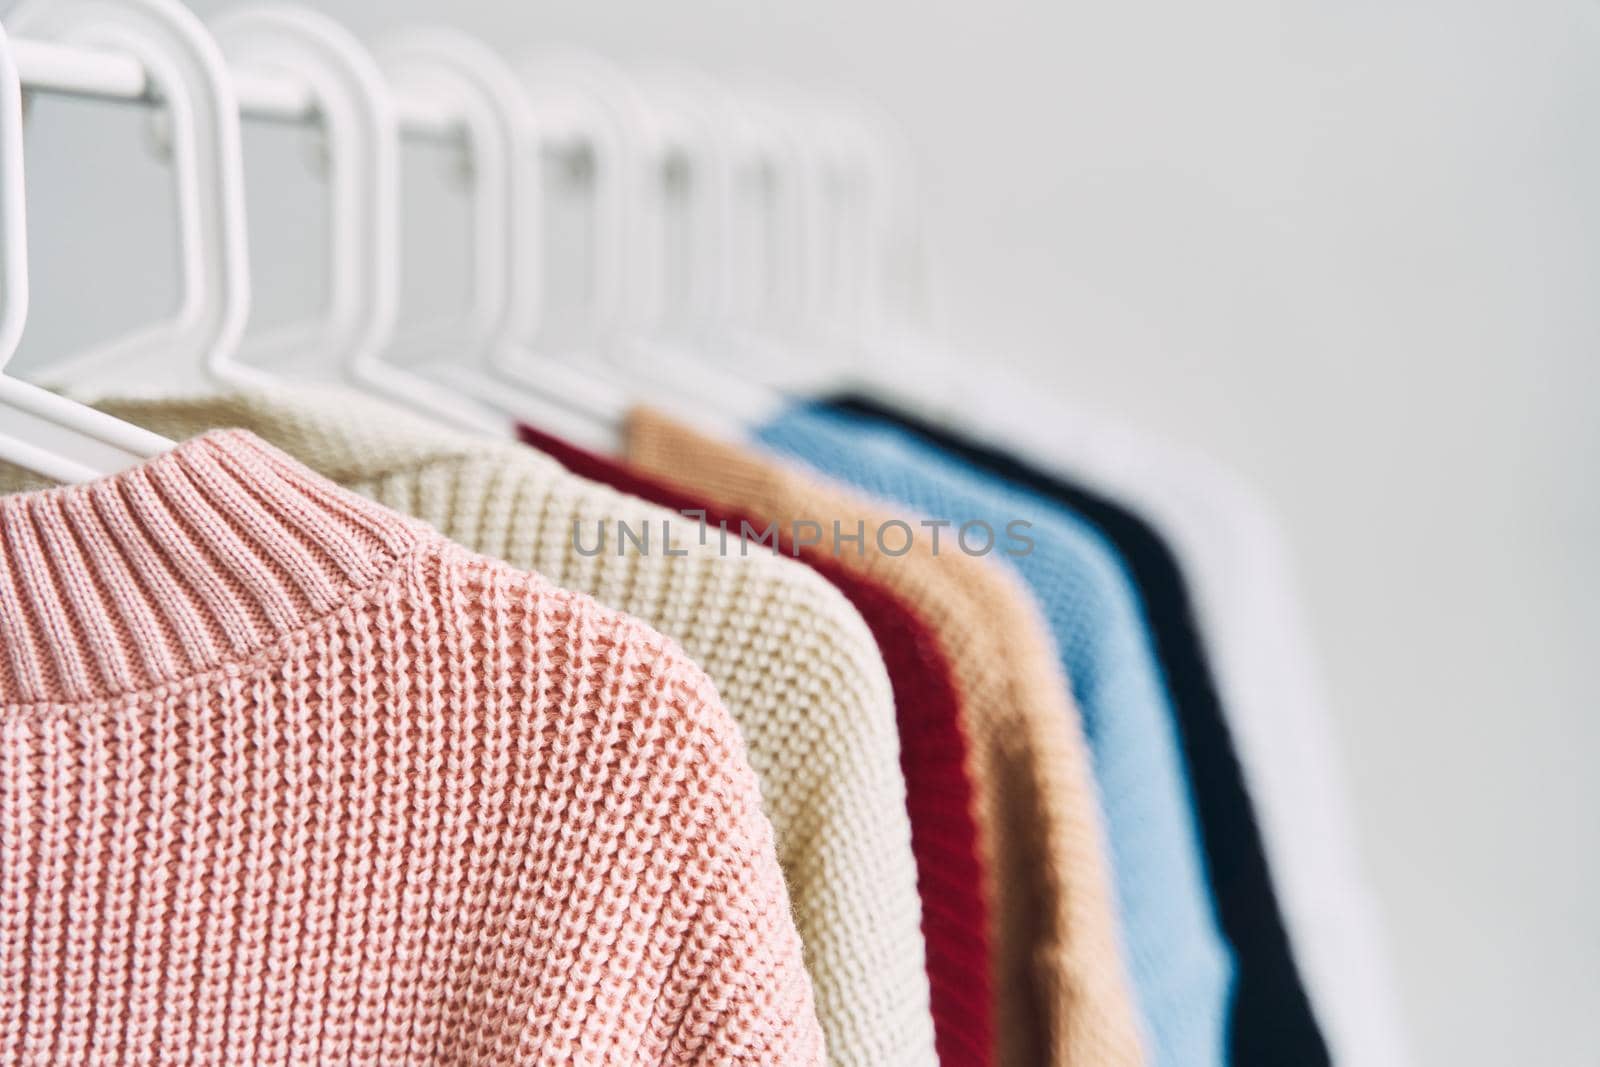 multicolored women's woolen sweaters on hangers. Sale in a fashion store. High quality photo